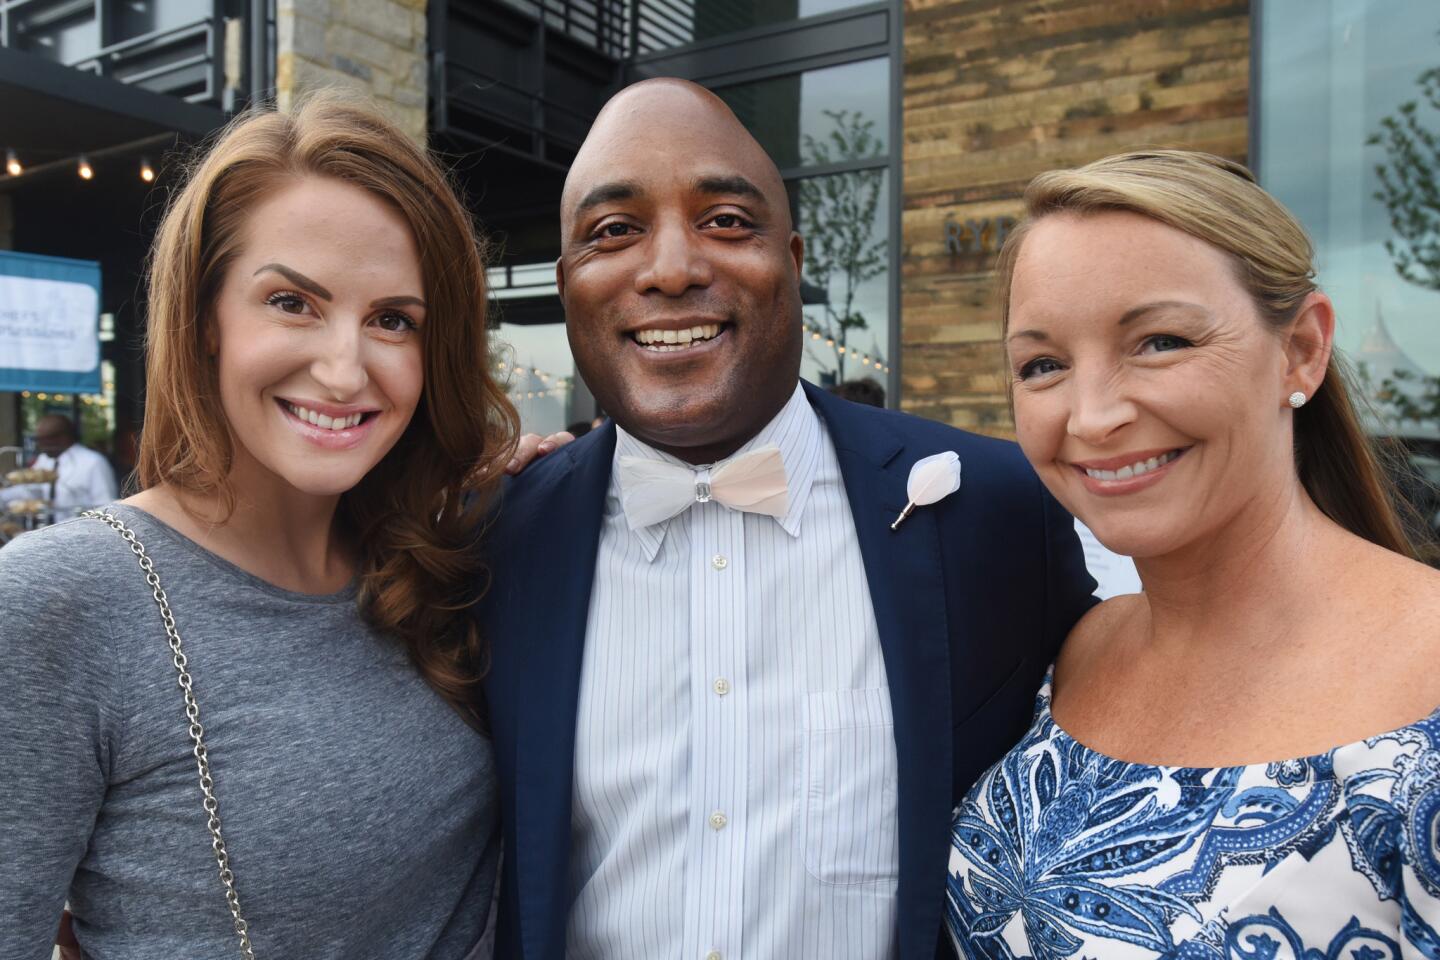 From left, Mary Brinegar, Garland Scott, and Tracey DuBree at the Bourbon and Bowties charity fundraiser held at Rye Street Tavern in Port Covington.